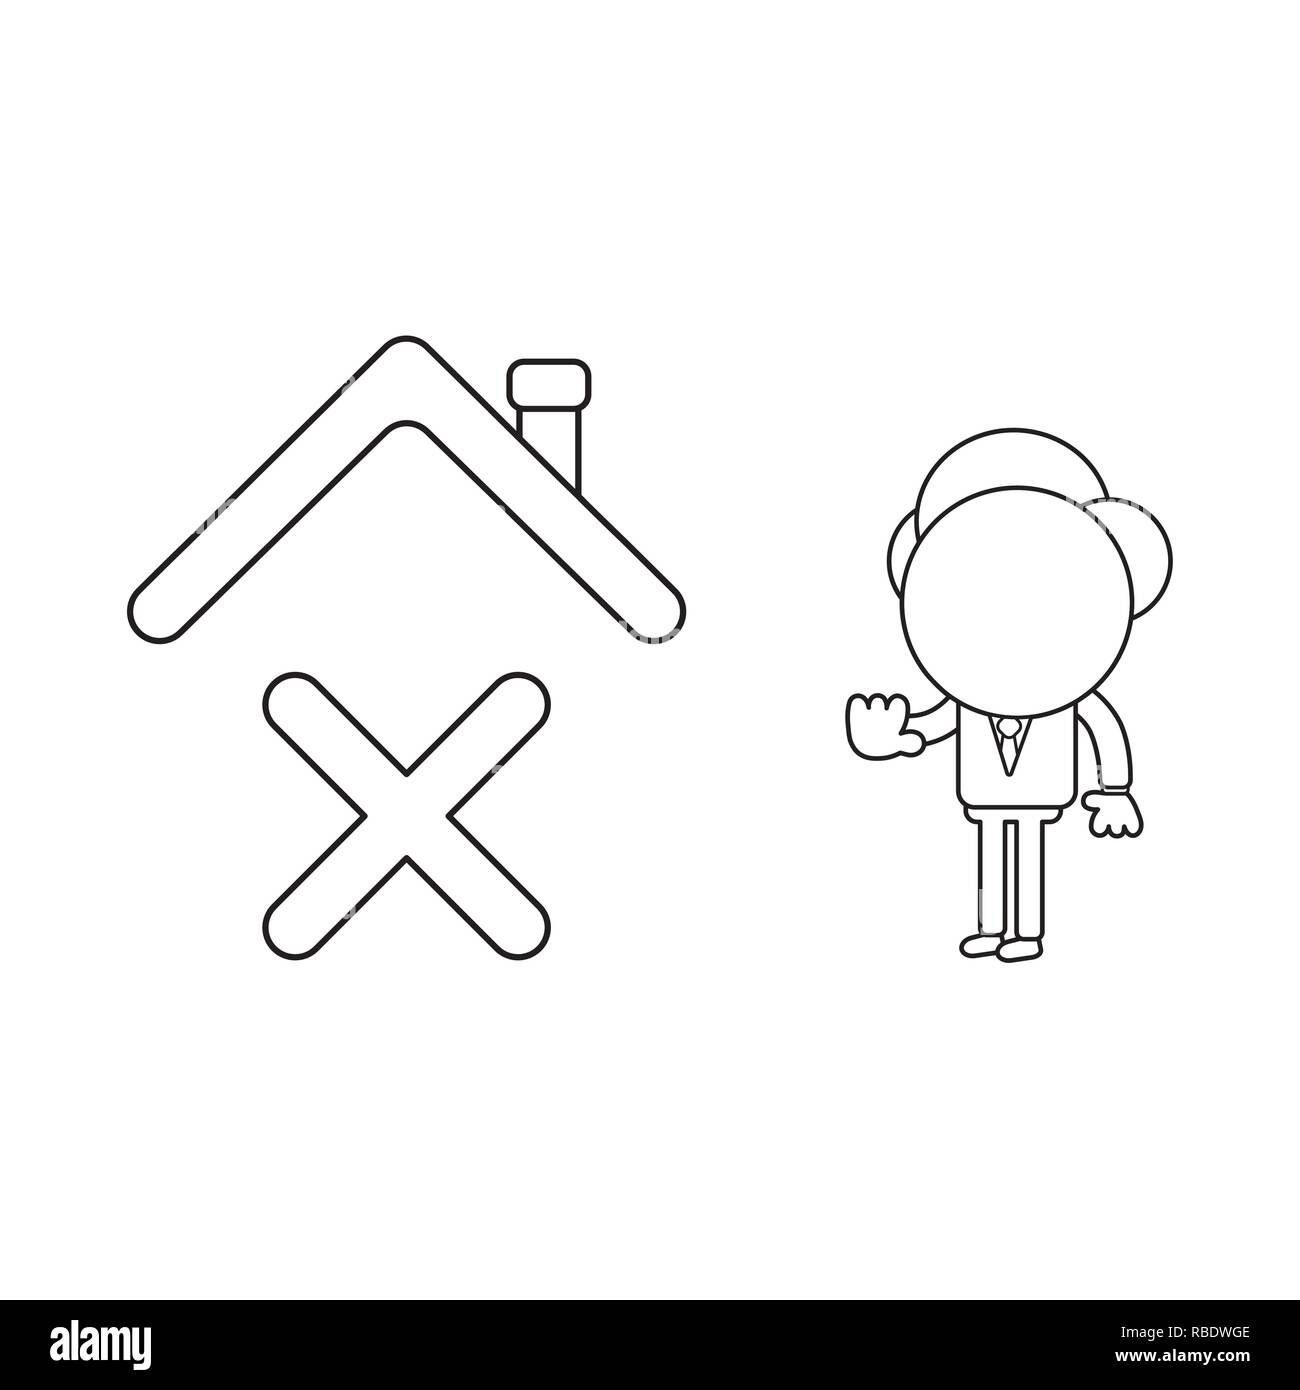 Vector illustration concept of businessman character with x mark under house roof and showing hand stop gesture. Black outline. Stock Vector